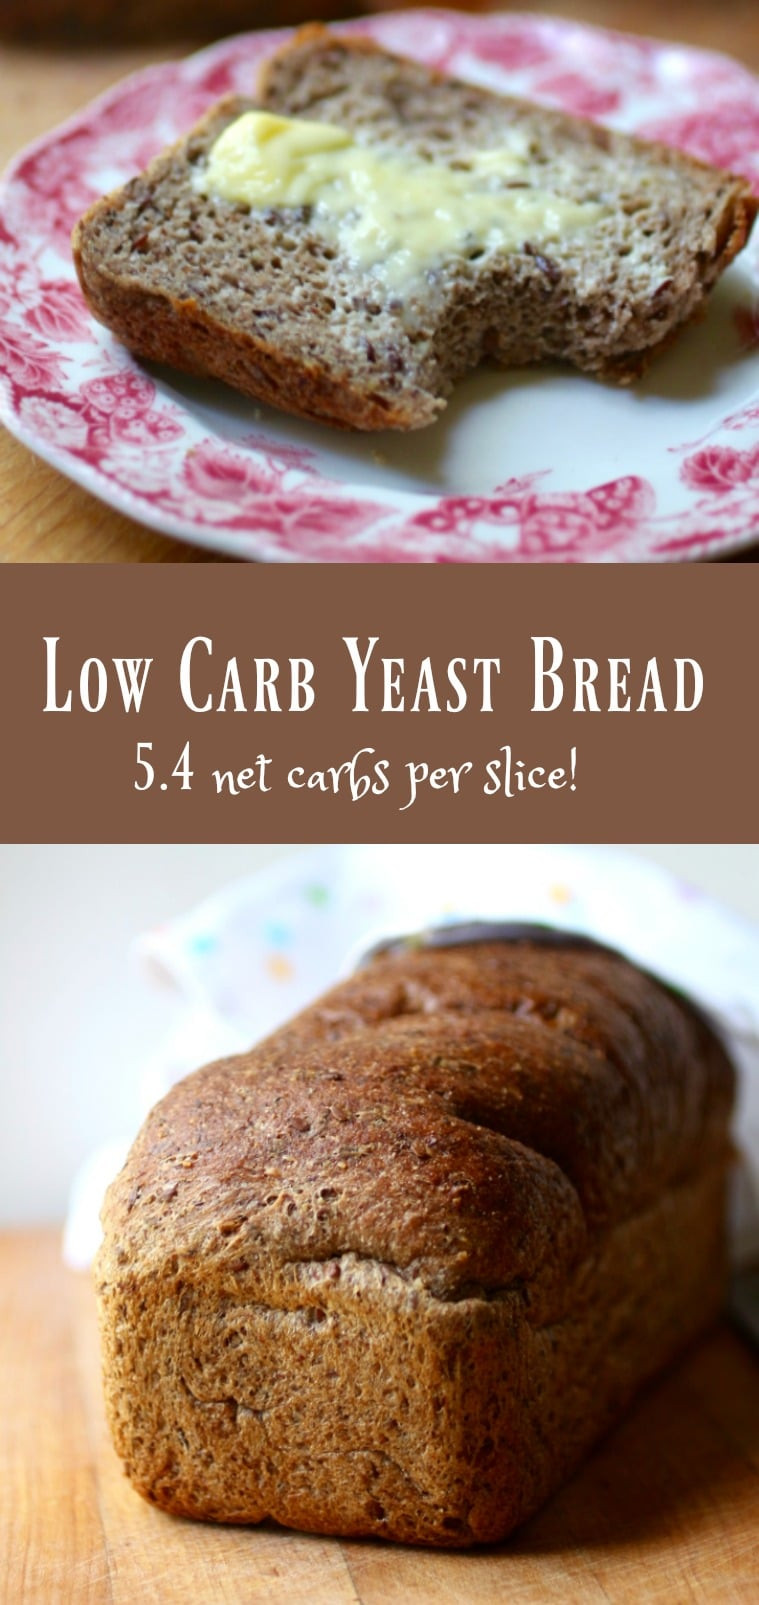 Low Carb Bread Recipes Yeast
 Low Carb Yeast Bread Keto Sandwich Bread lowcarb ology